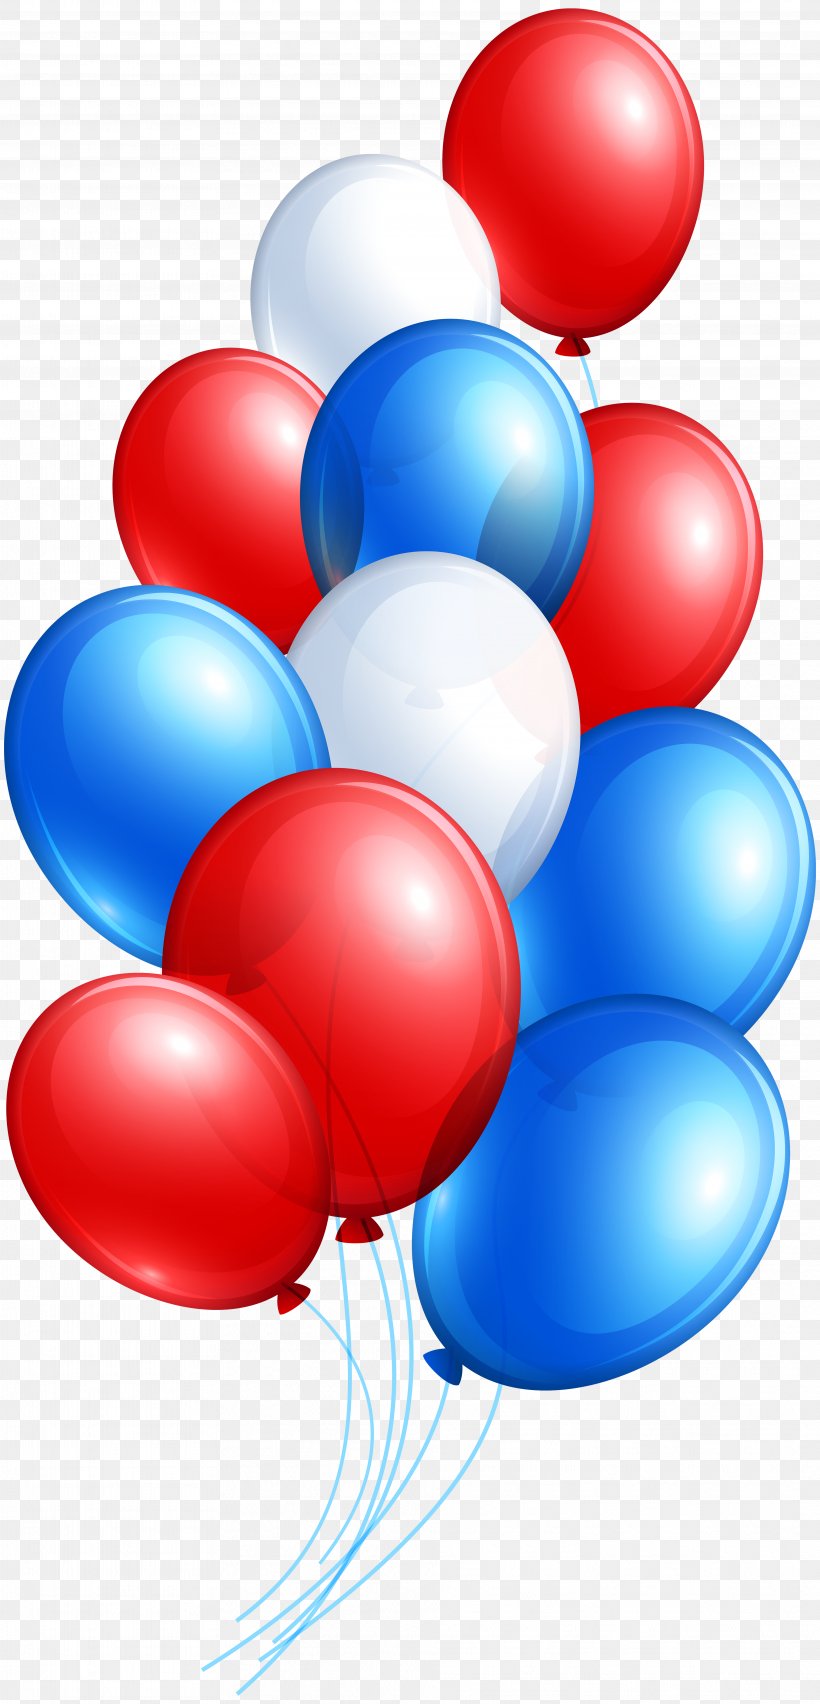 Independence Day Symbol Clip Art, PNG, 3848x8000px, Independence Day, Balloon, Fireworks, Heart, Party Supply Download Free